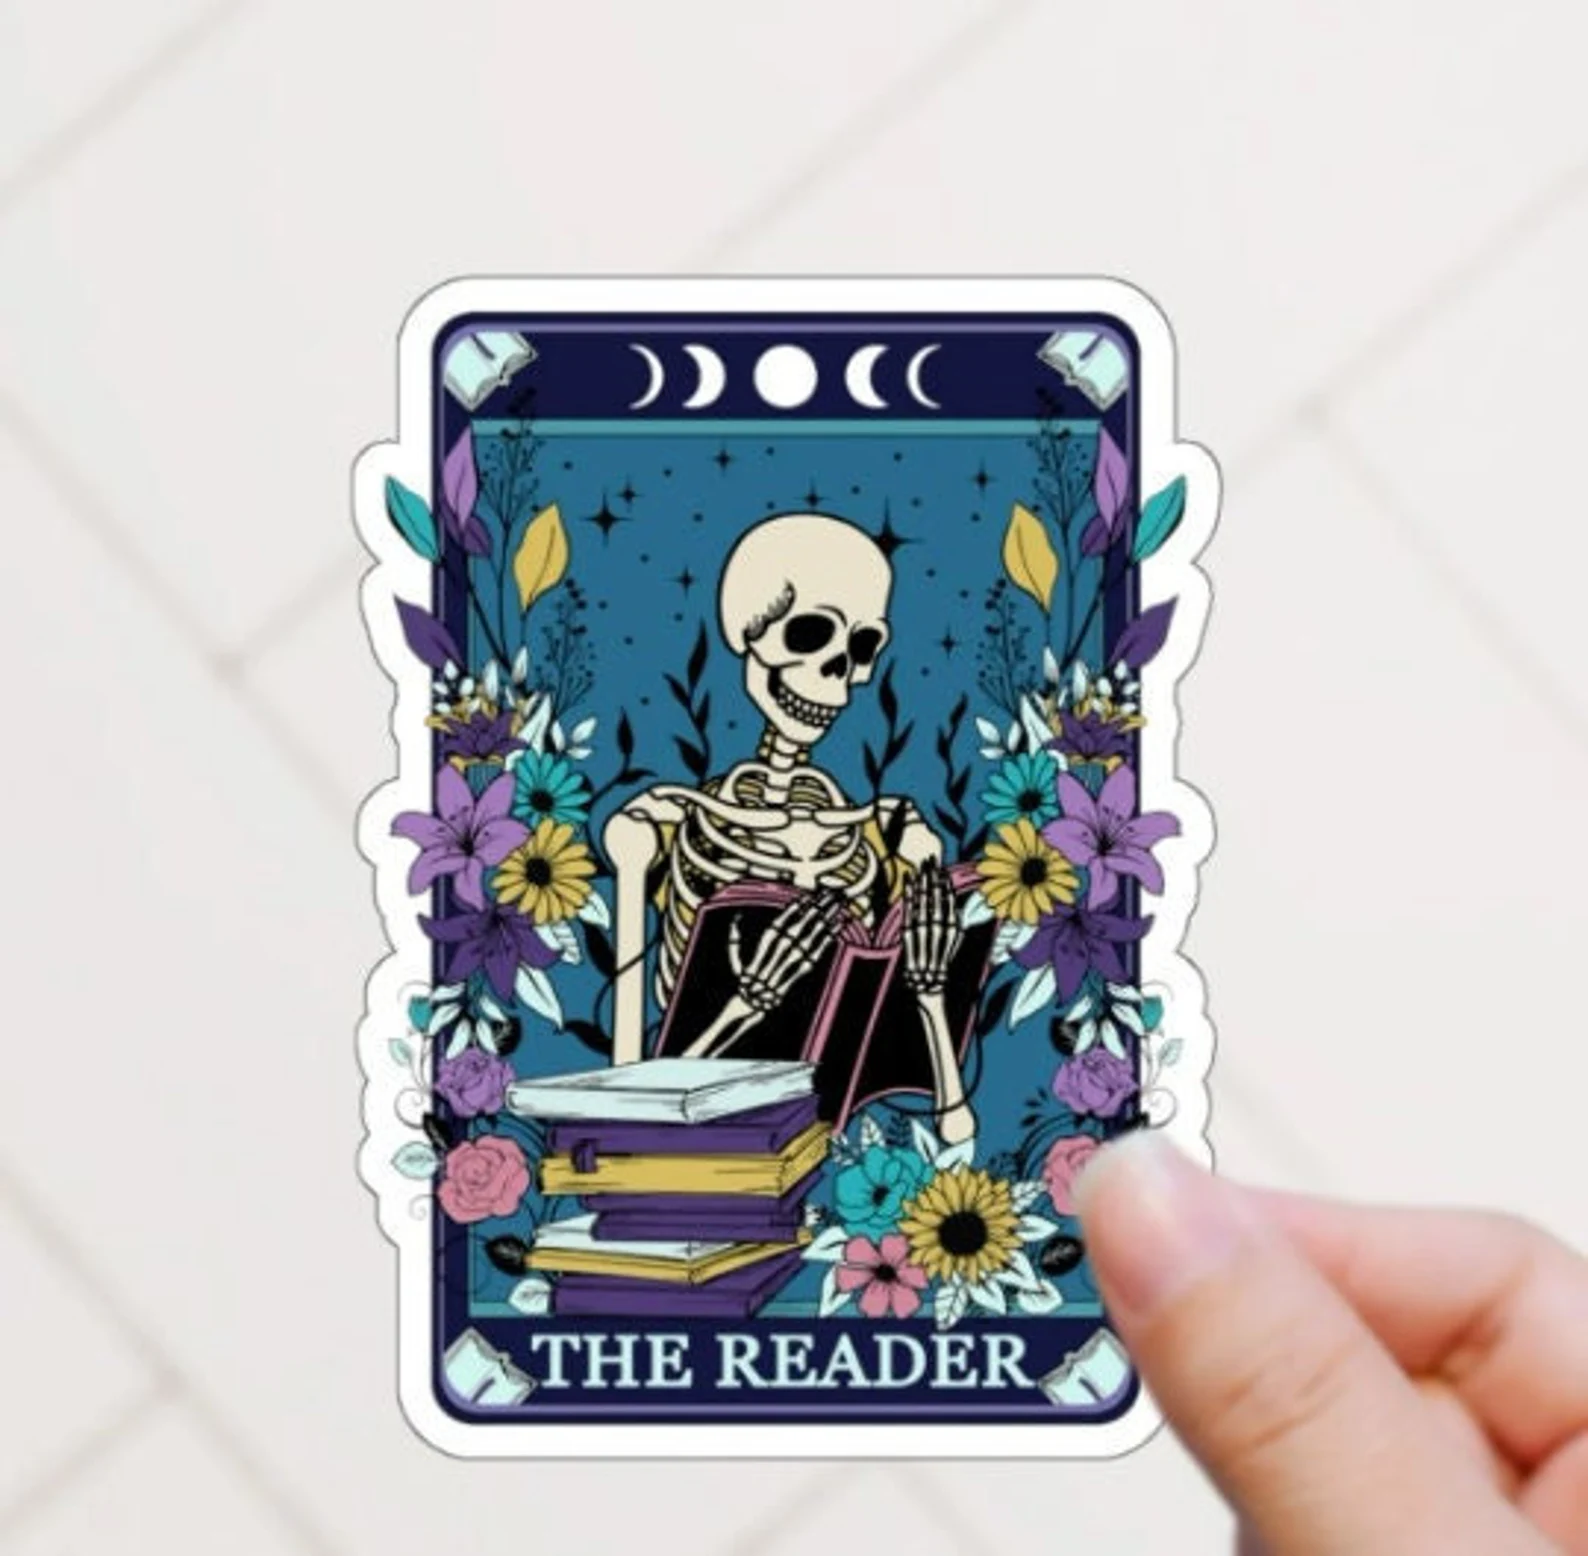 a sticker in the design of a tarot card with a skeleton holding a book